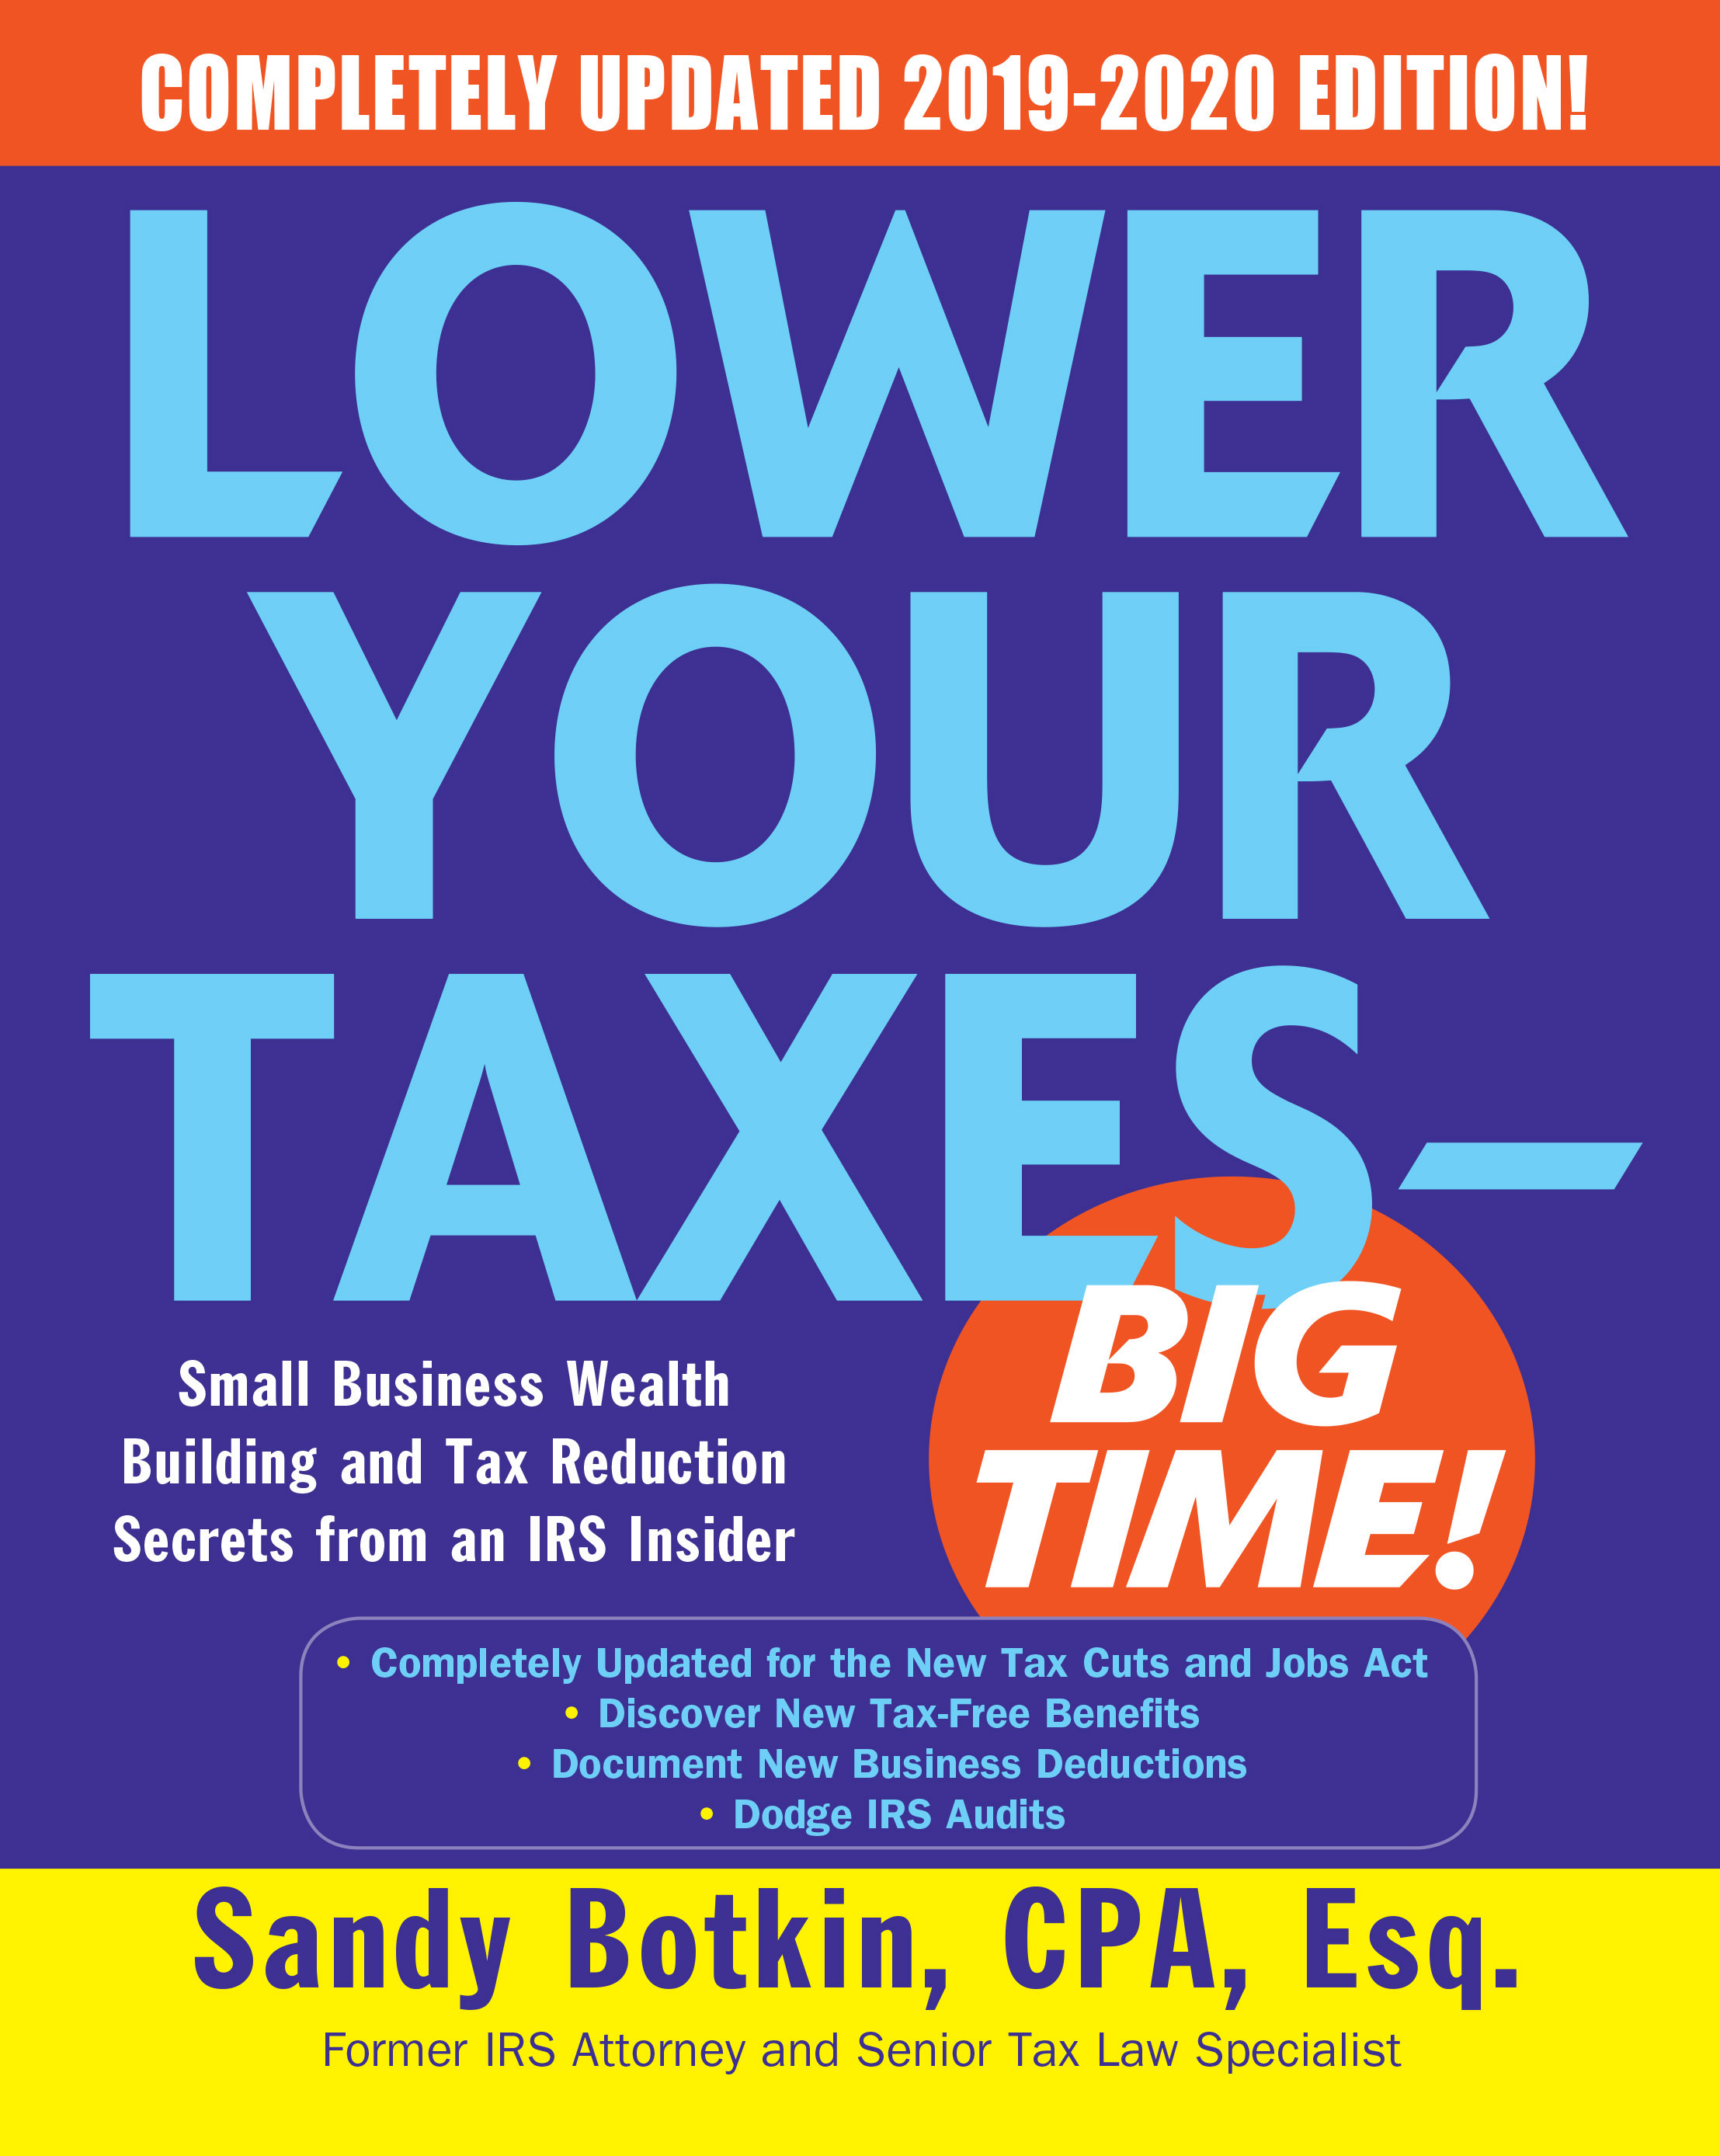 Lower Your Taxes - BIG TIME! 2019-2020